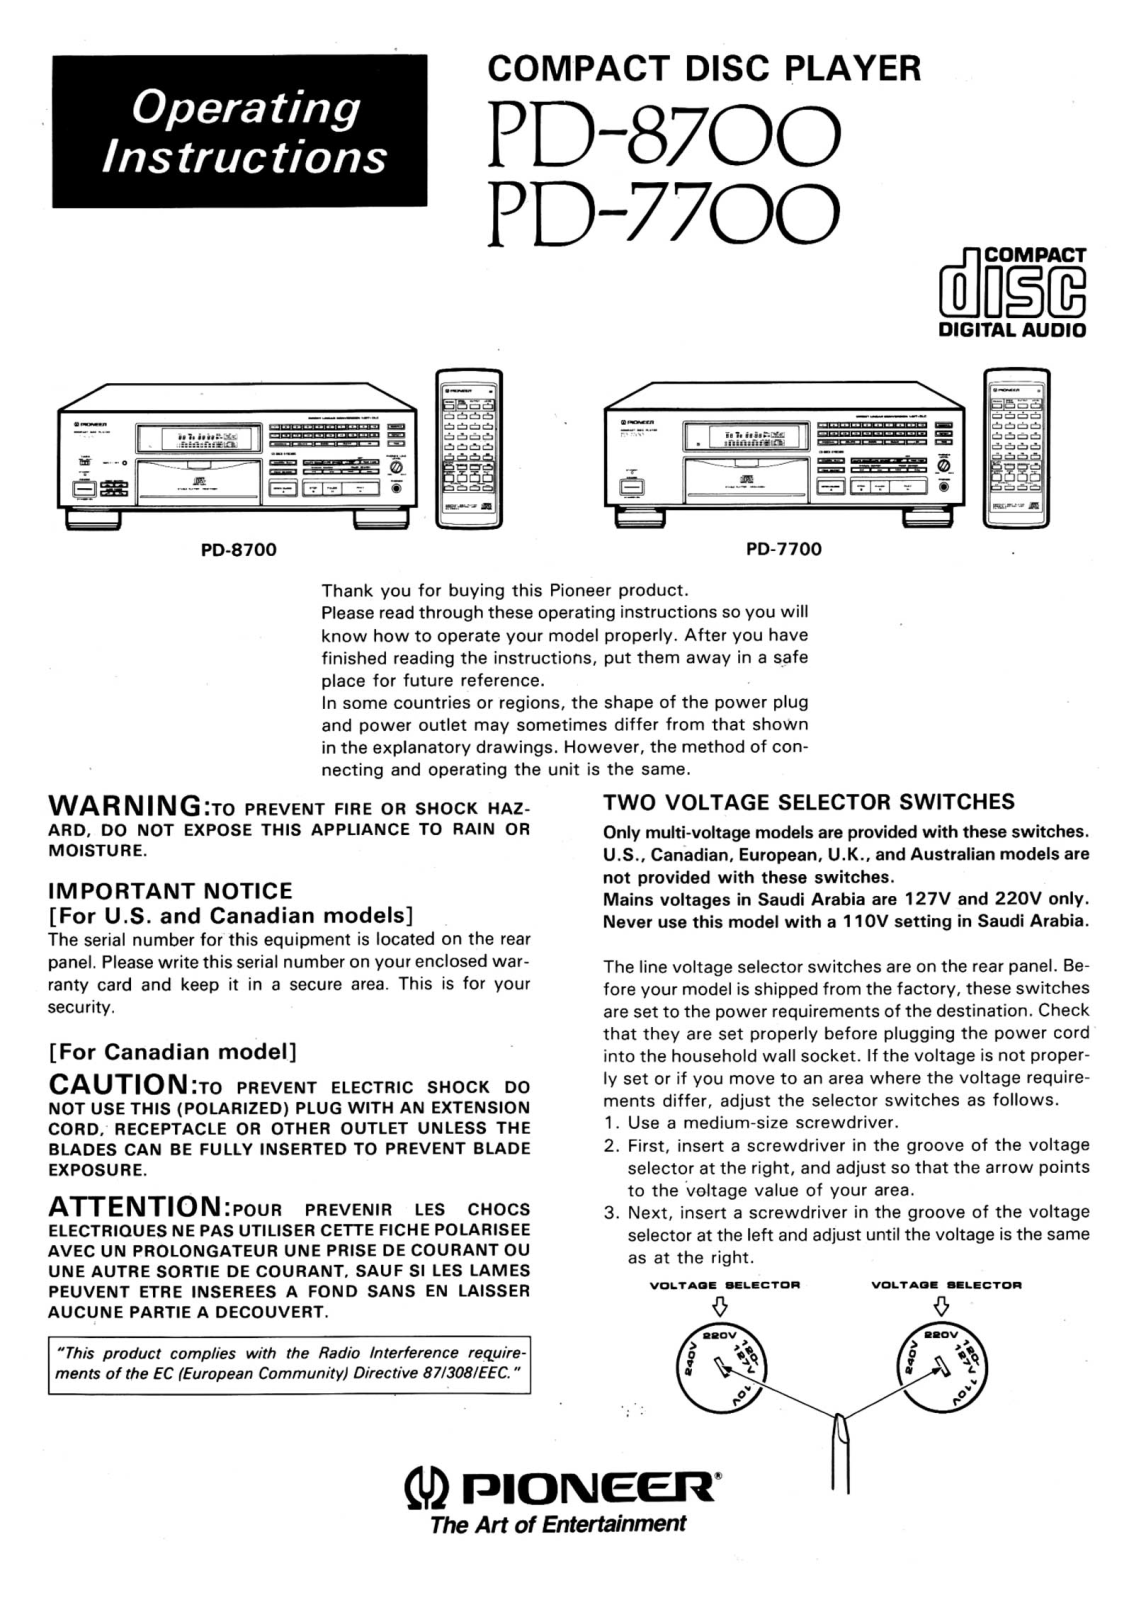 Pioneer PD-8700, PD-7700 Owners Manual